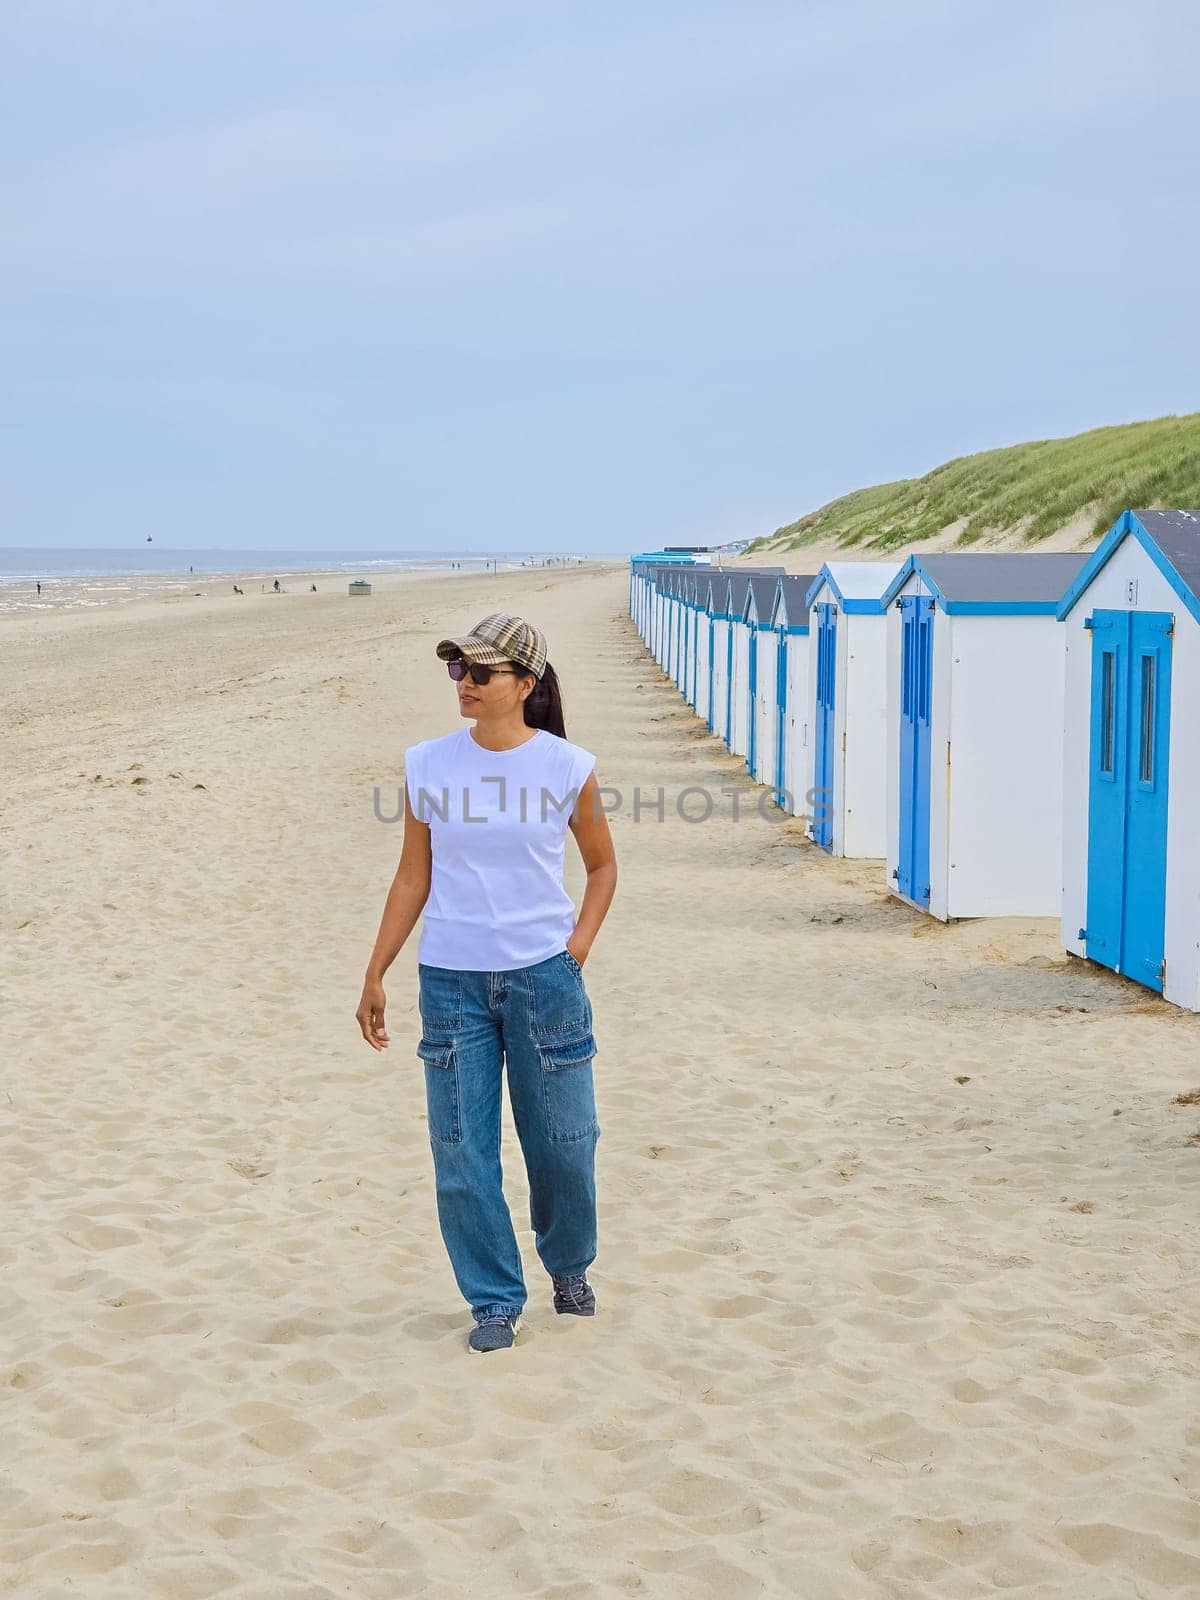 A stylish woman strolls gracefully, passing by a vibrant row of beach huts lining the Texel, Netherlands coastline.